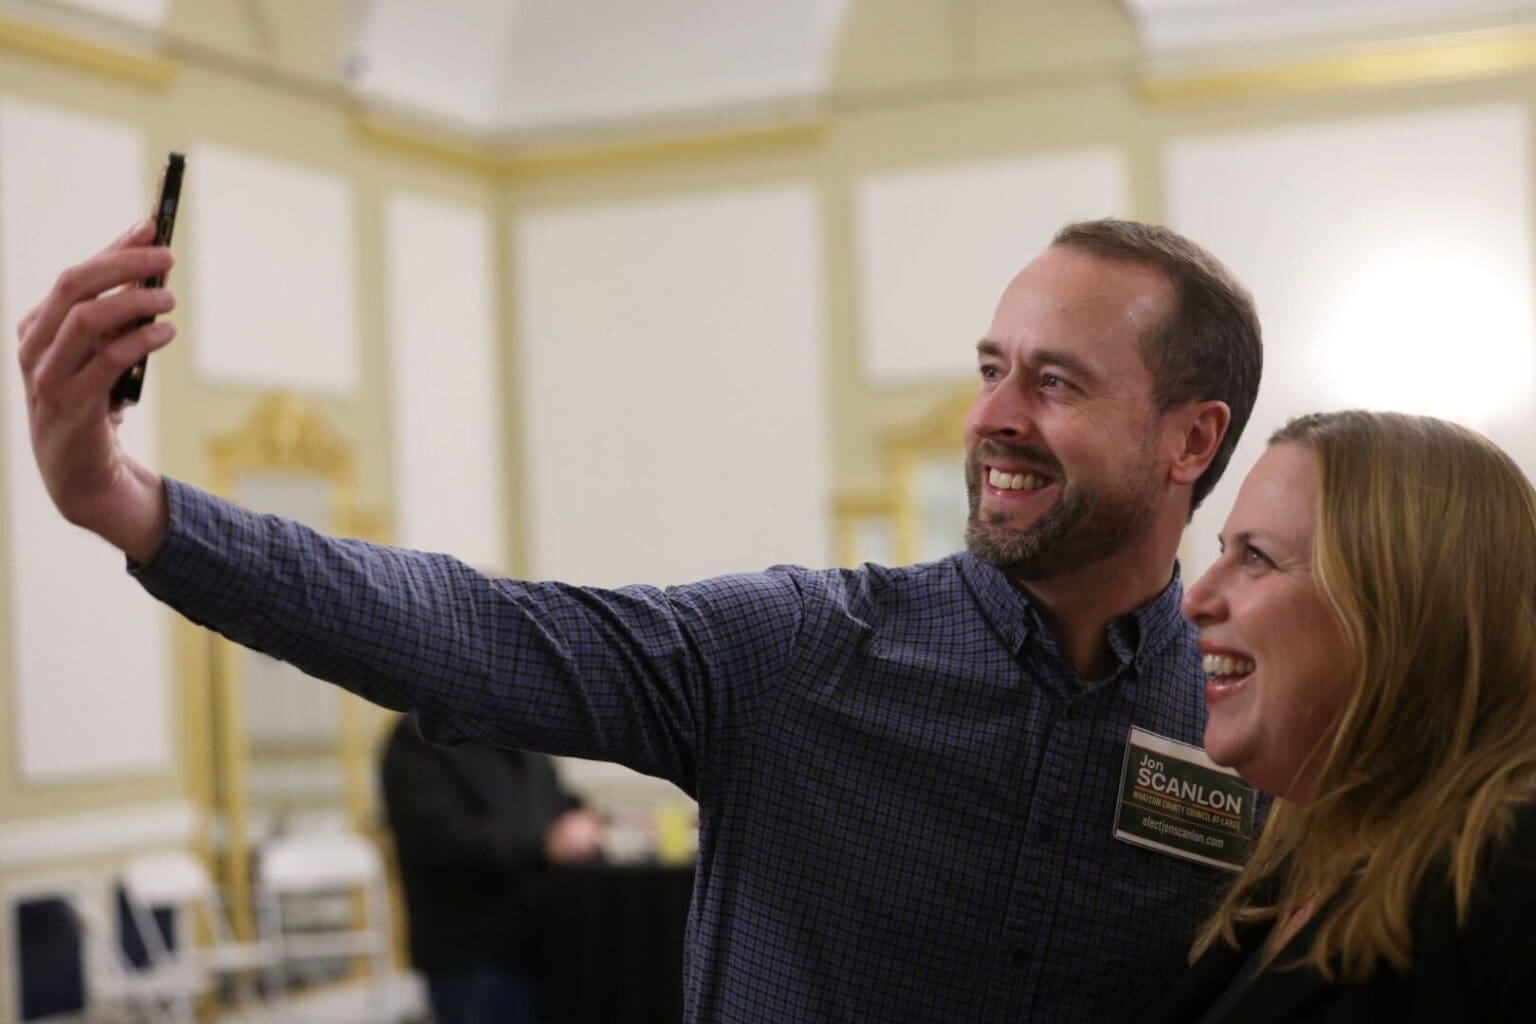 Whatcom County Council candidate Jon Scanlon takes a selfie with state Rep. Alicia Rule Tuesday